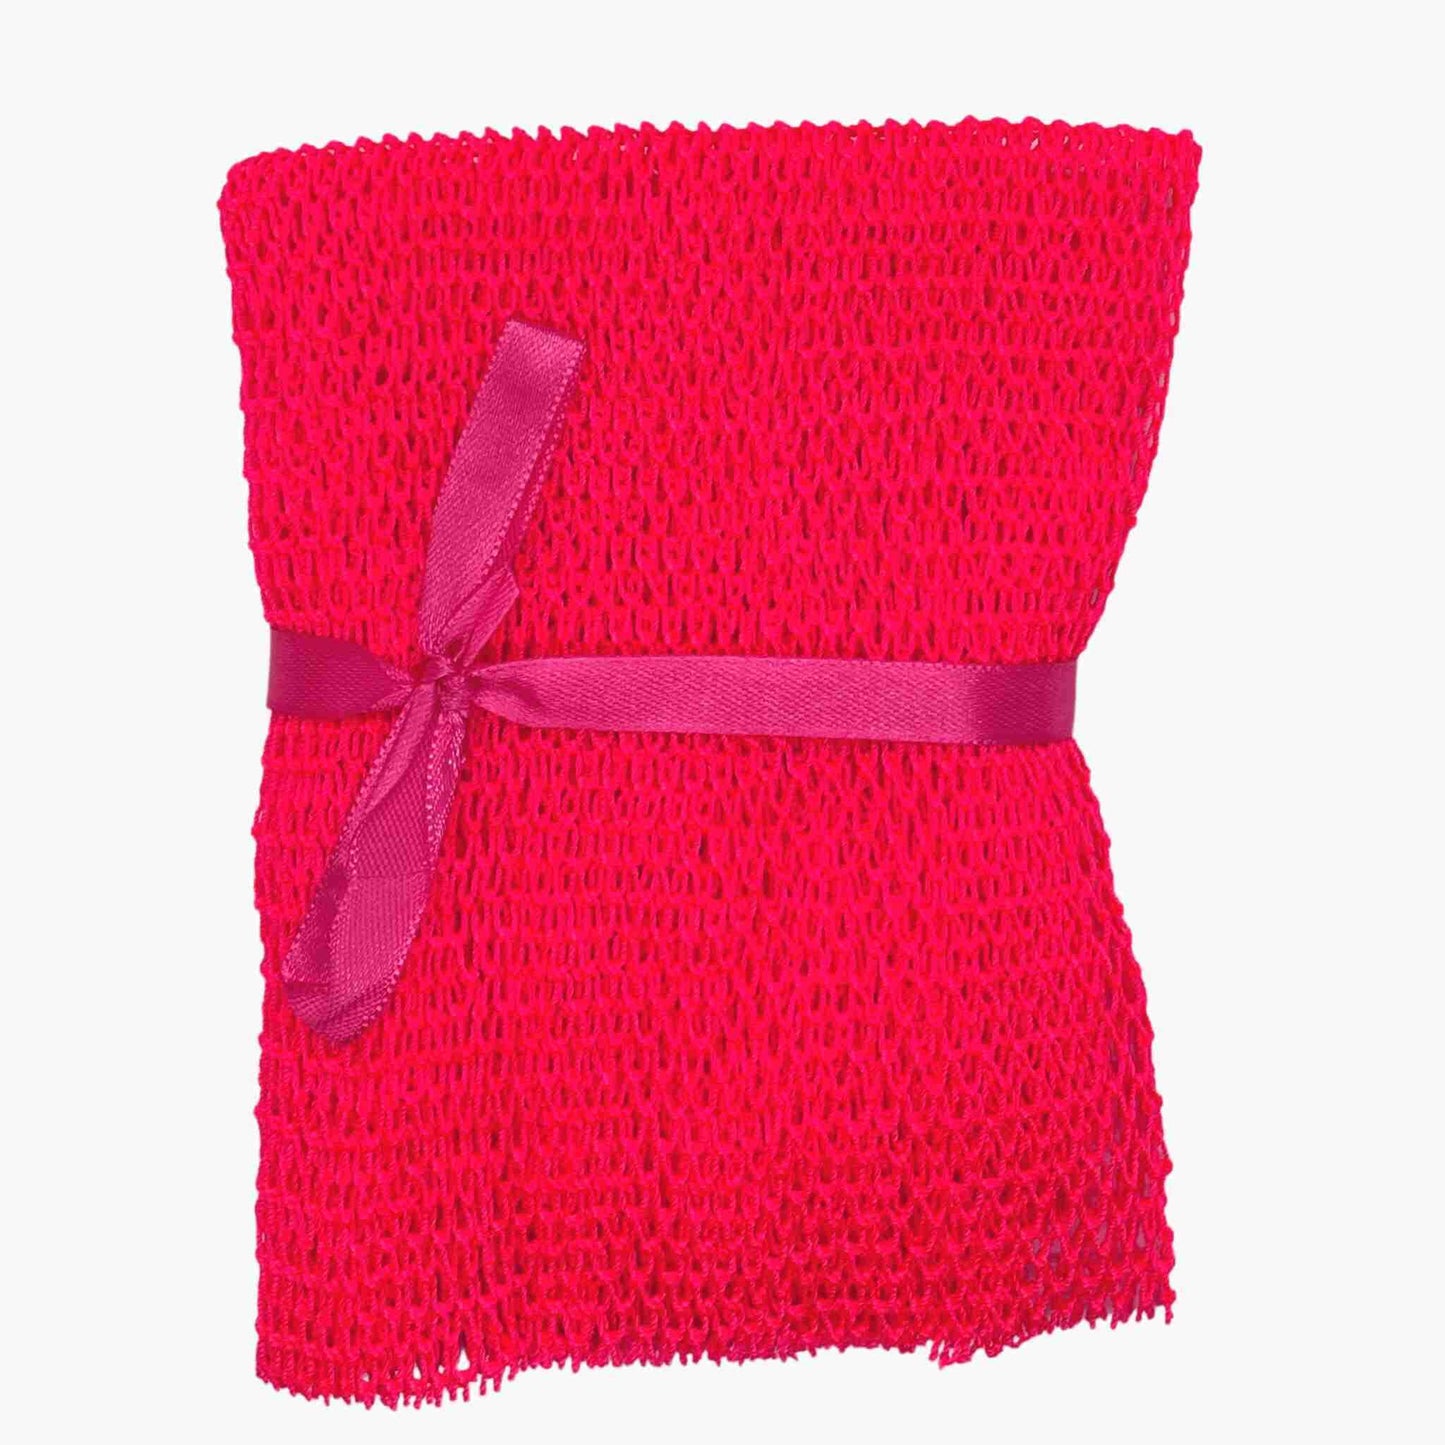 Flat image and top view of a hot pink shower exfoliation net wrapped in a pink bow - Sincerely Sanguine